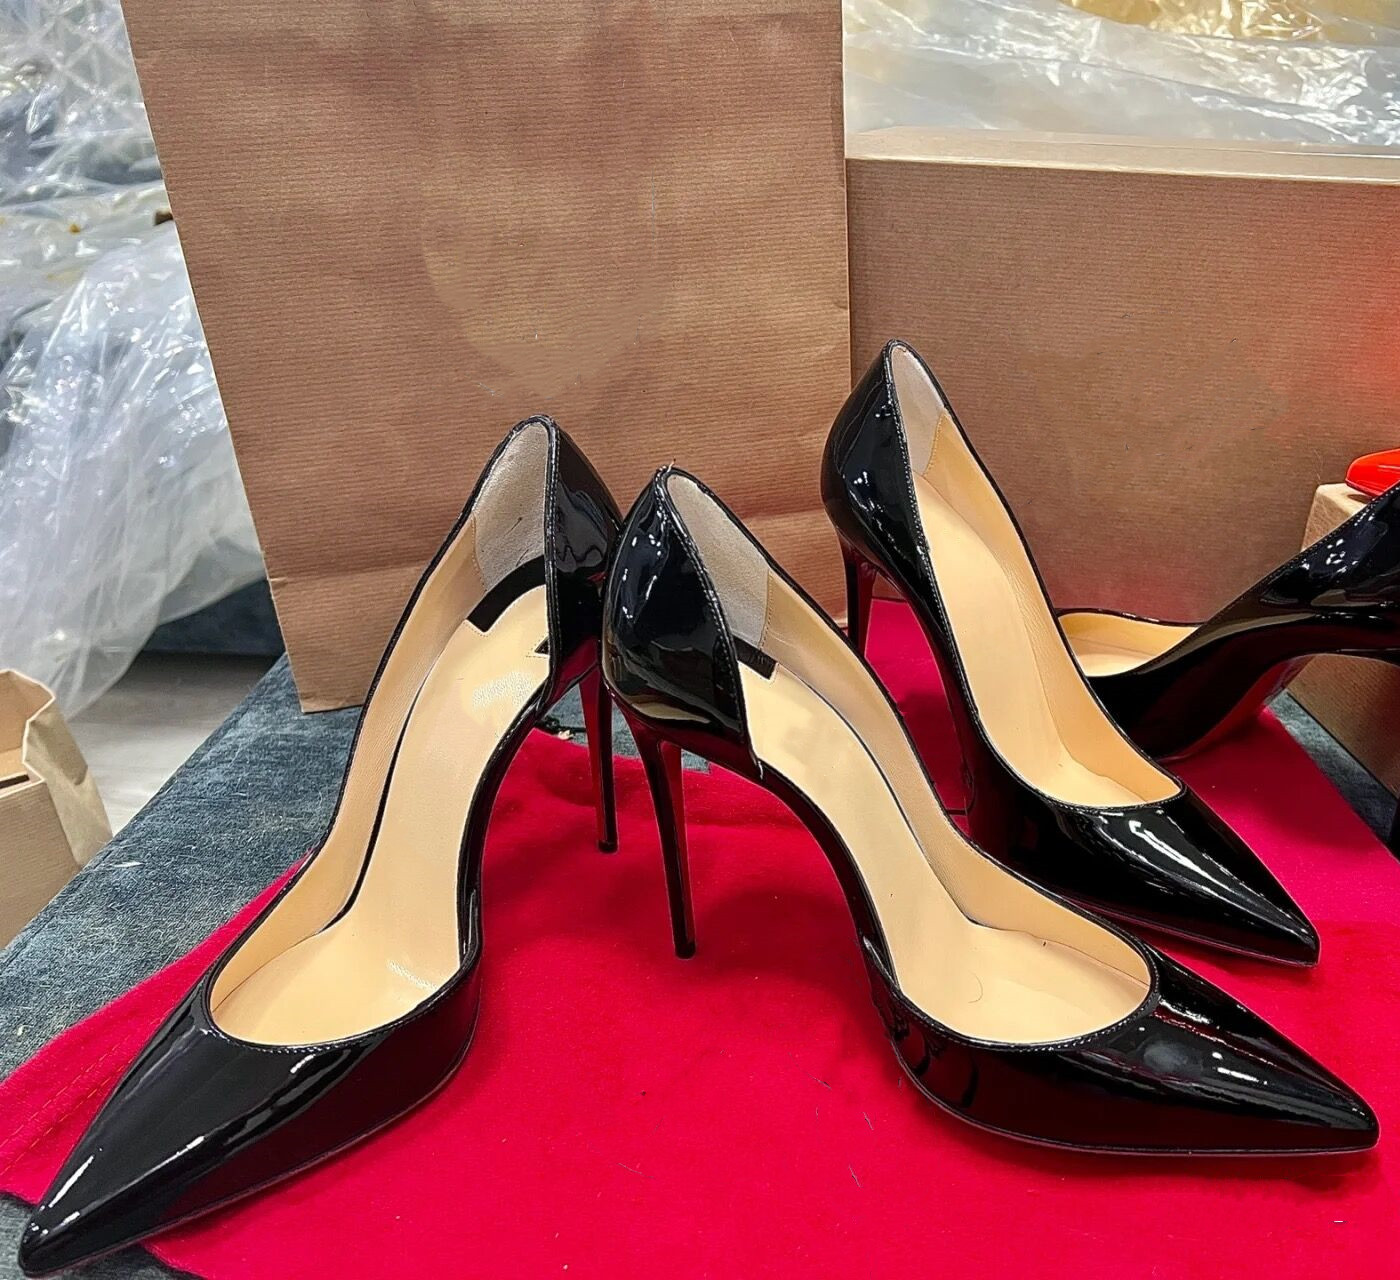 

Red Brand High Heel Shoes Designer Women Pointed Shoes Nude Black Patent Leather 8cm 10cm 12cm Thin Heels Shallow Women's Pumps with Dust Bag 34-44, Black red